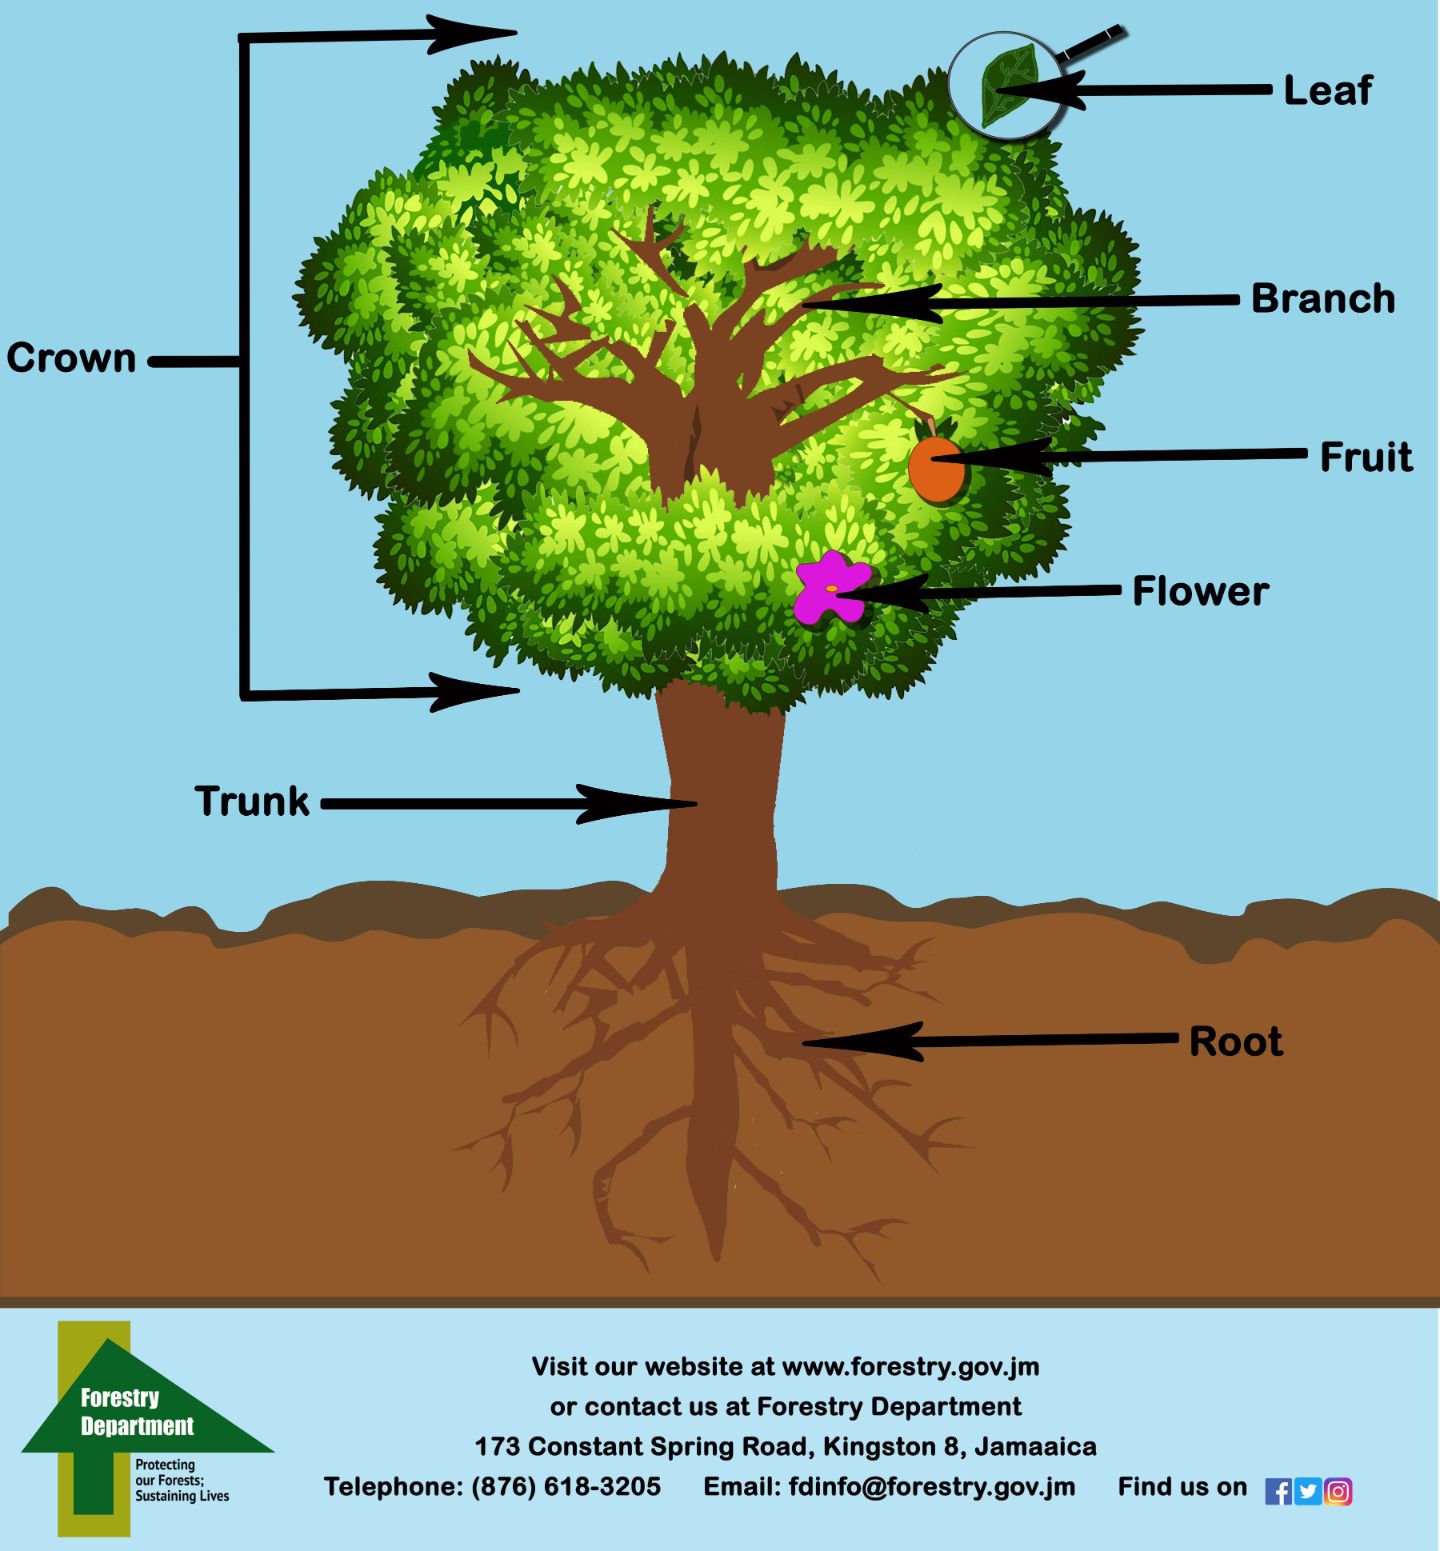 Parts Of A Tree Labelling Worksheets Sb12381 Sparklebox - Bank2home.com